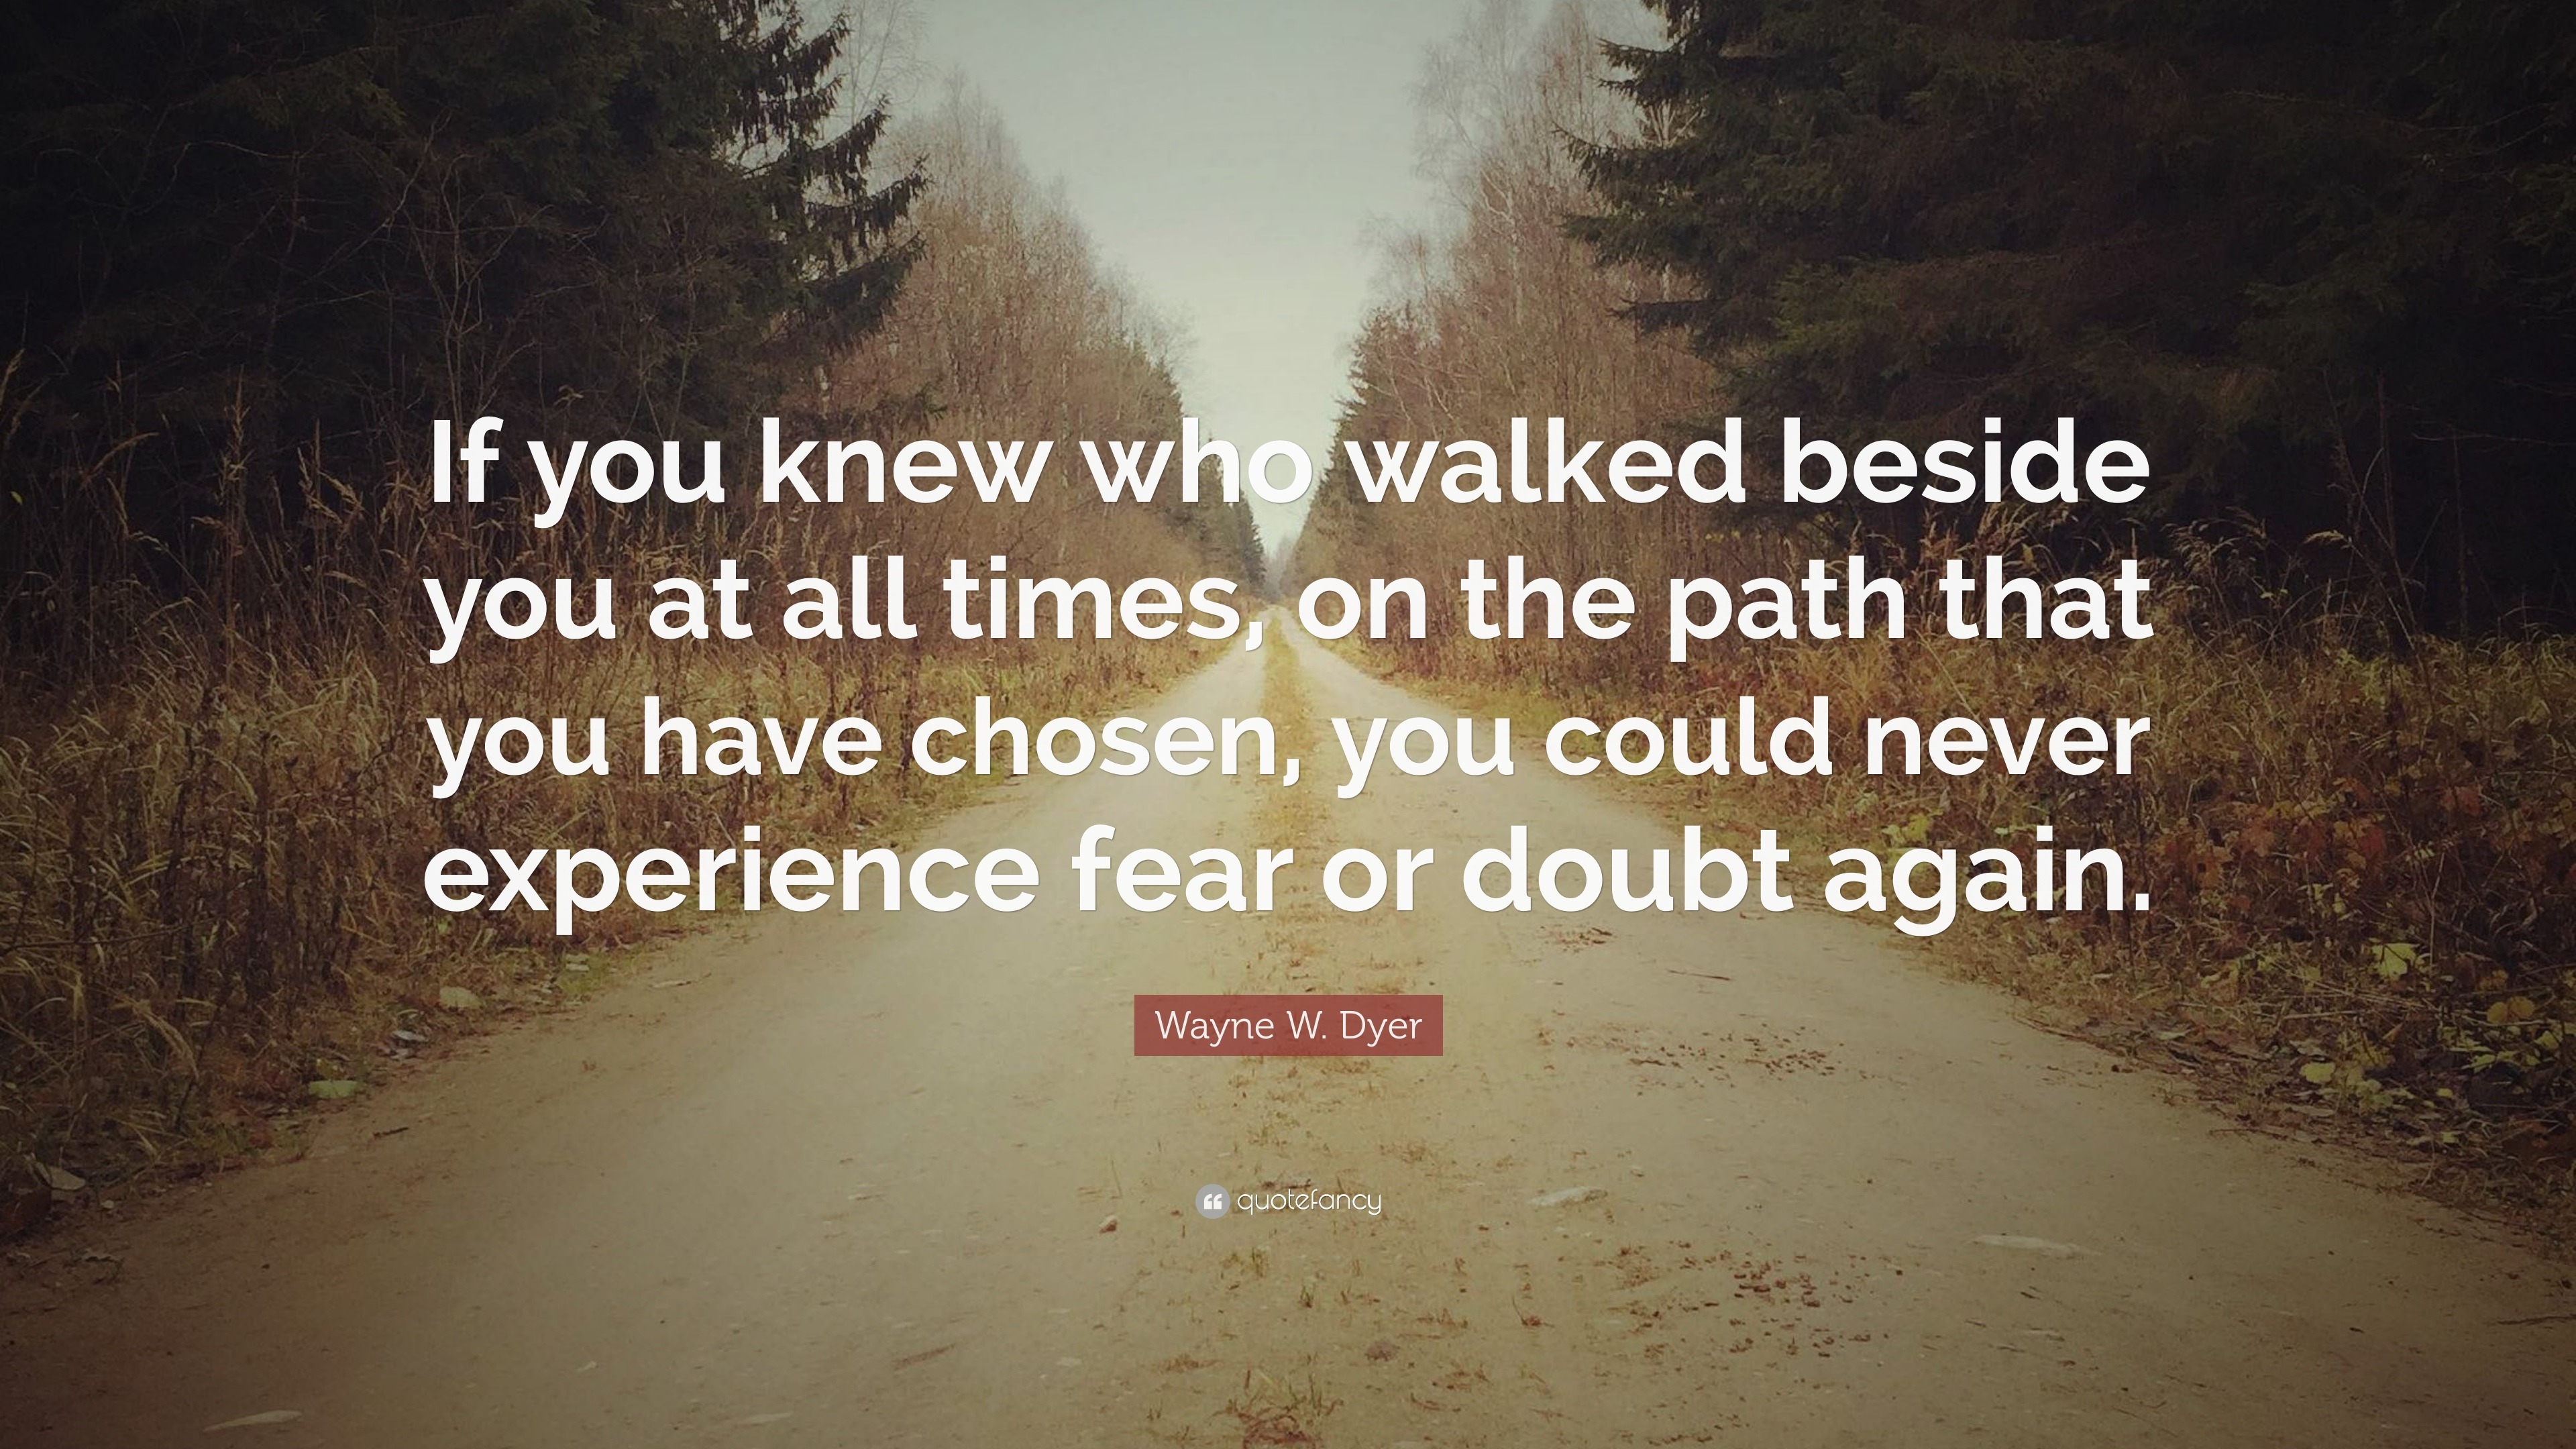 Wayne W. Dyer Quote: “If you knew who walked beside you at all times ...